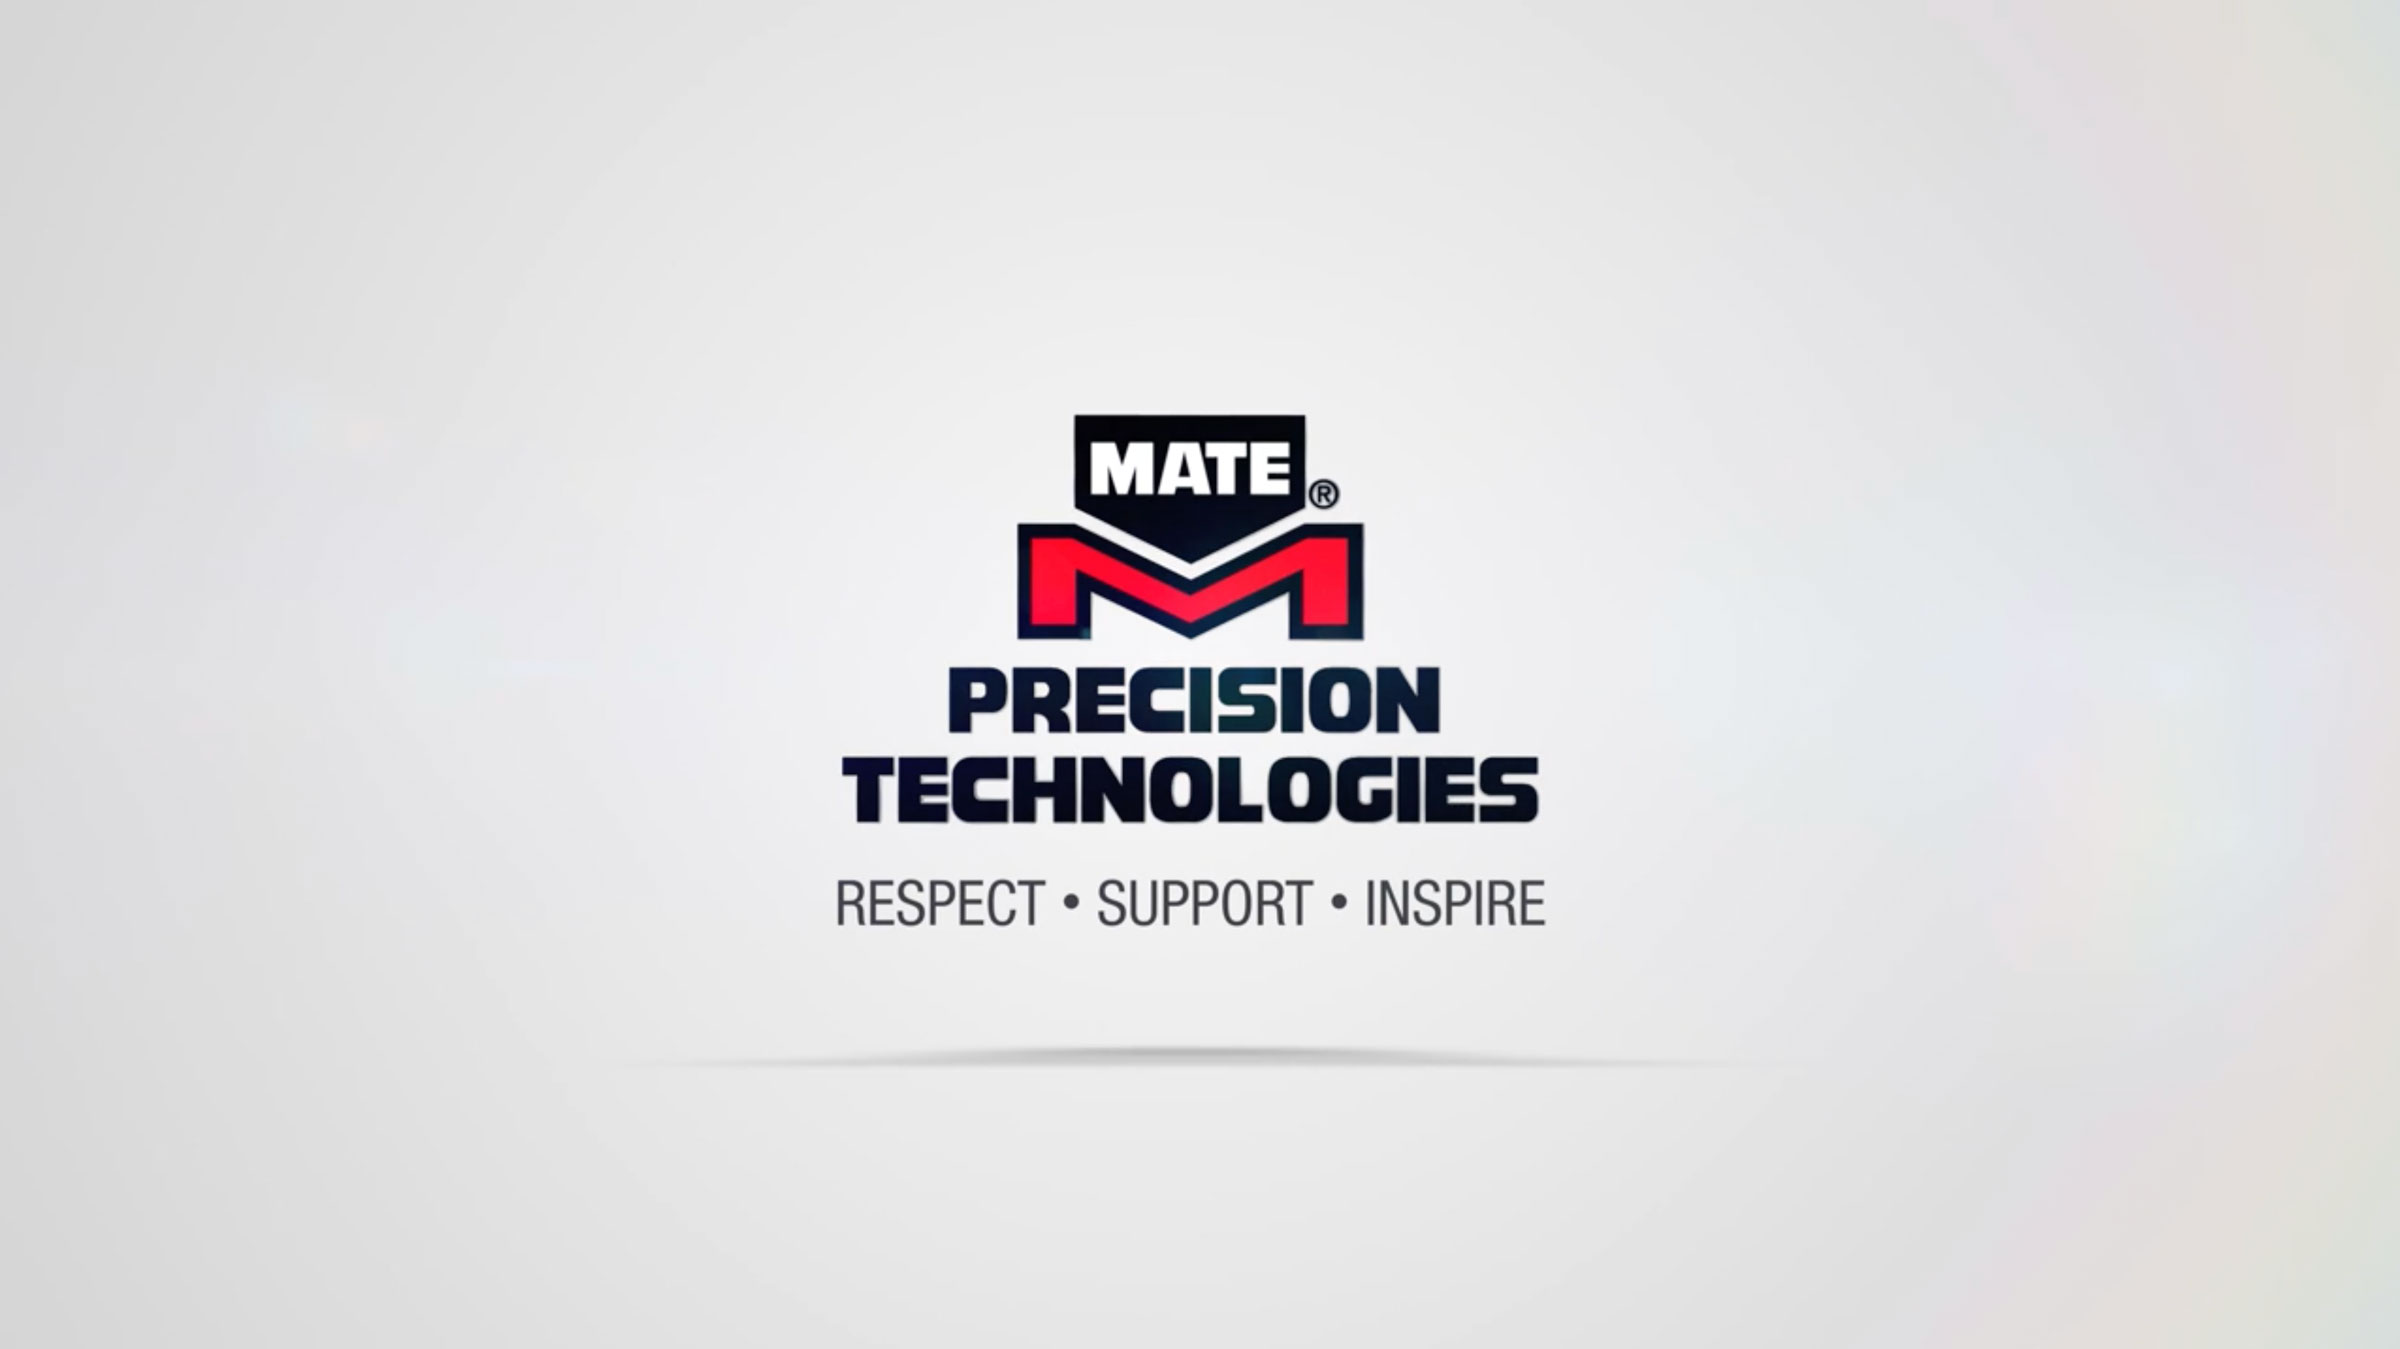 No Interruptions. No Surprises: Workholding from Mate Precision Technologies